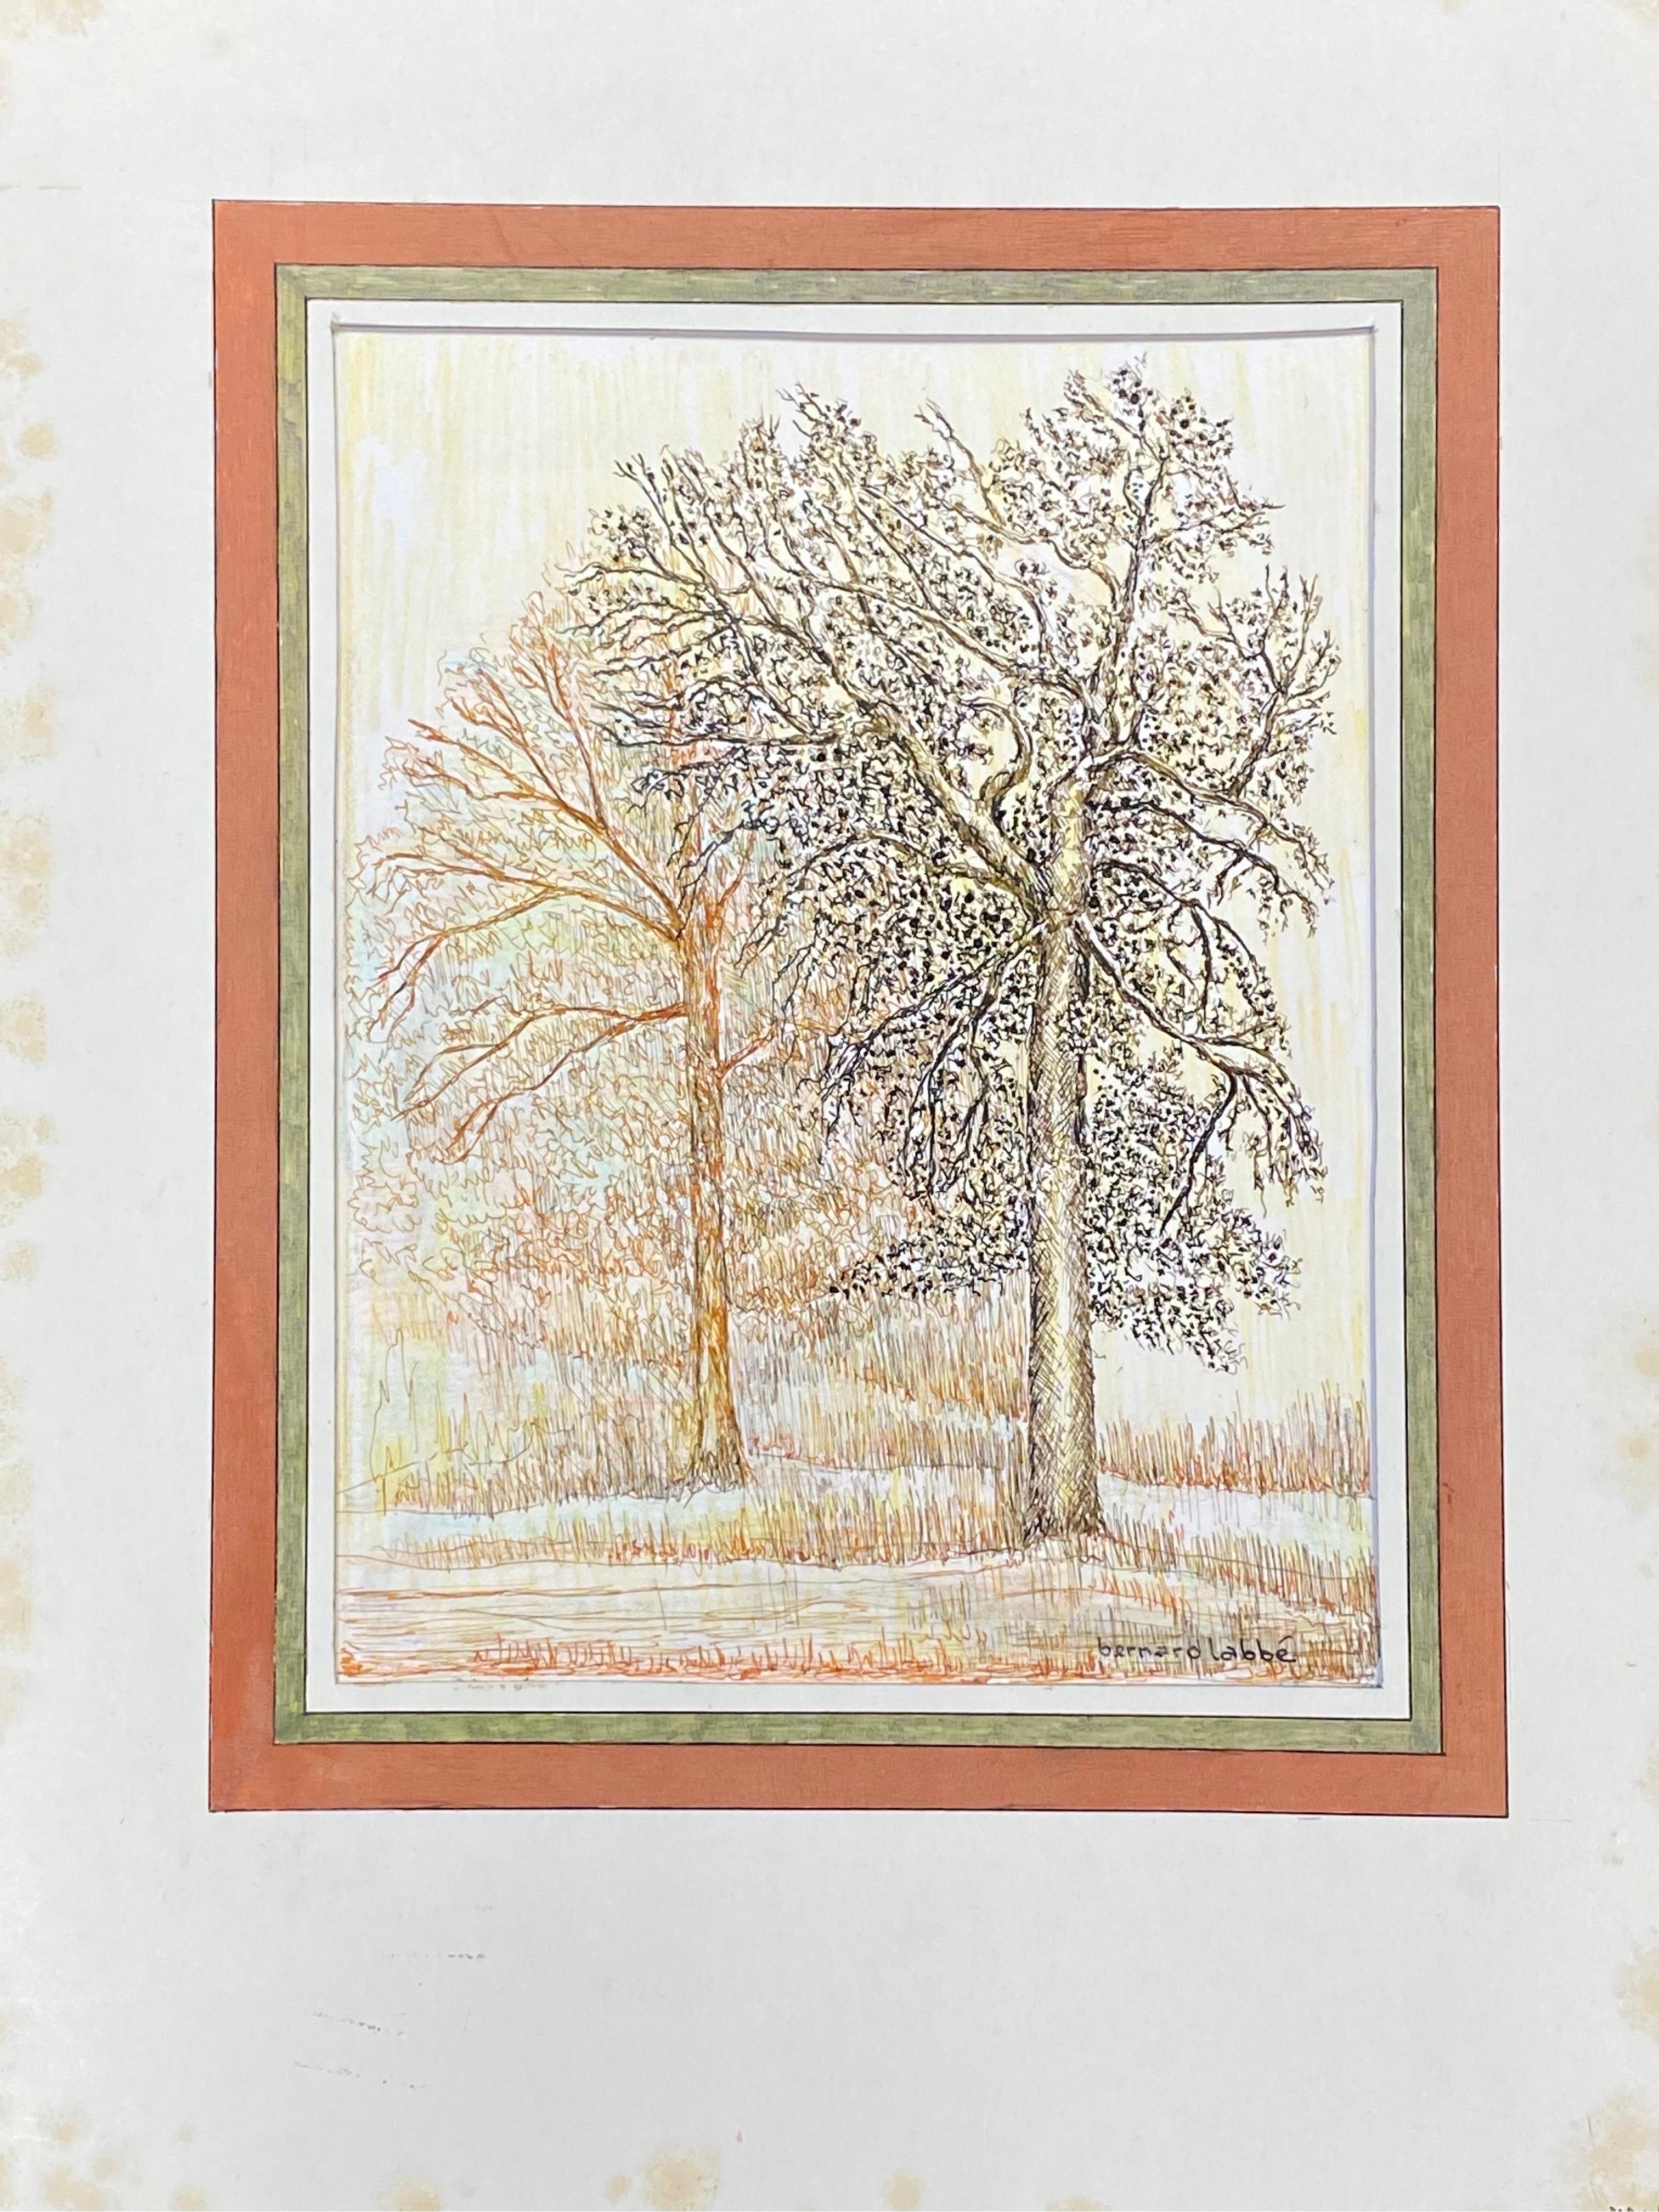 The Two Trees
by Bernard Labbe (French mid 20th century), signed, stamped verso
original watercolour/gouache painting on paper 
overall size: 14.5 x 11.5 inches
condition: very good and ready to be enjoyed. 

provenance: the artists atelier/